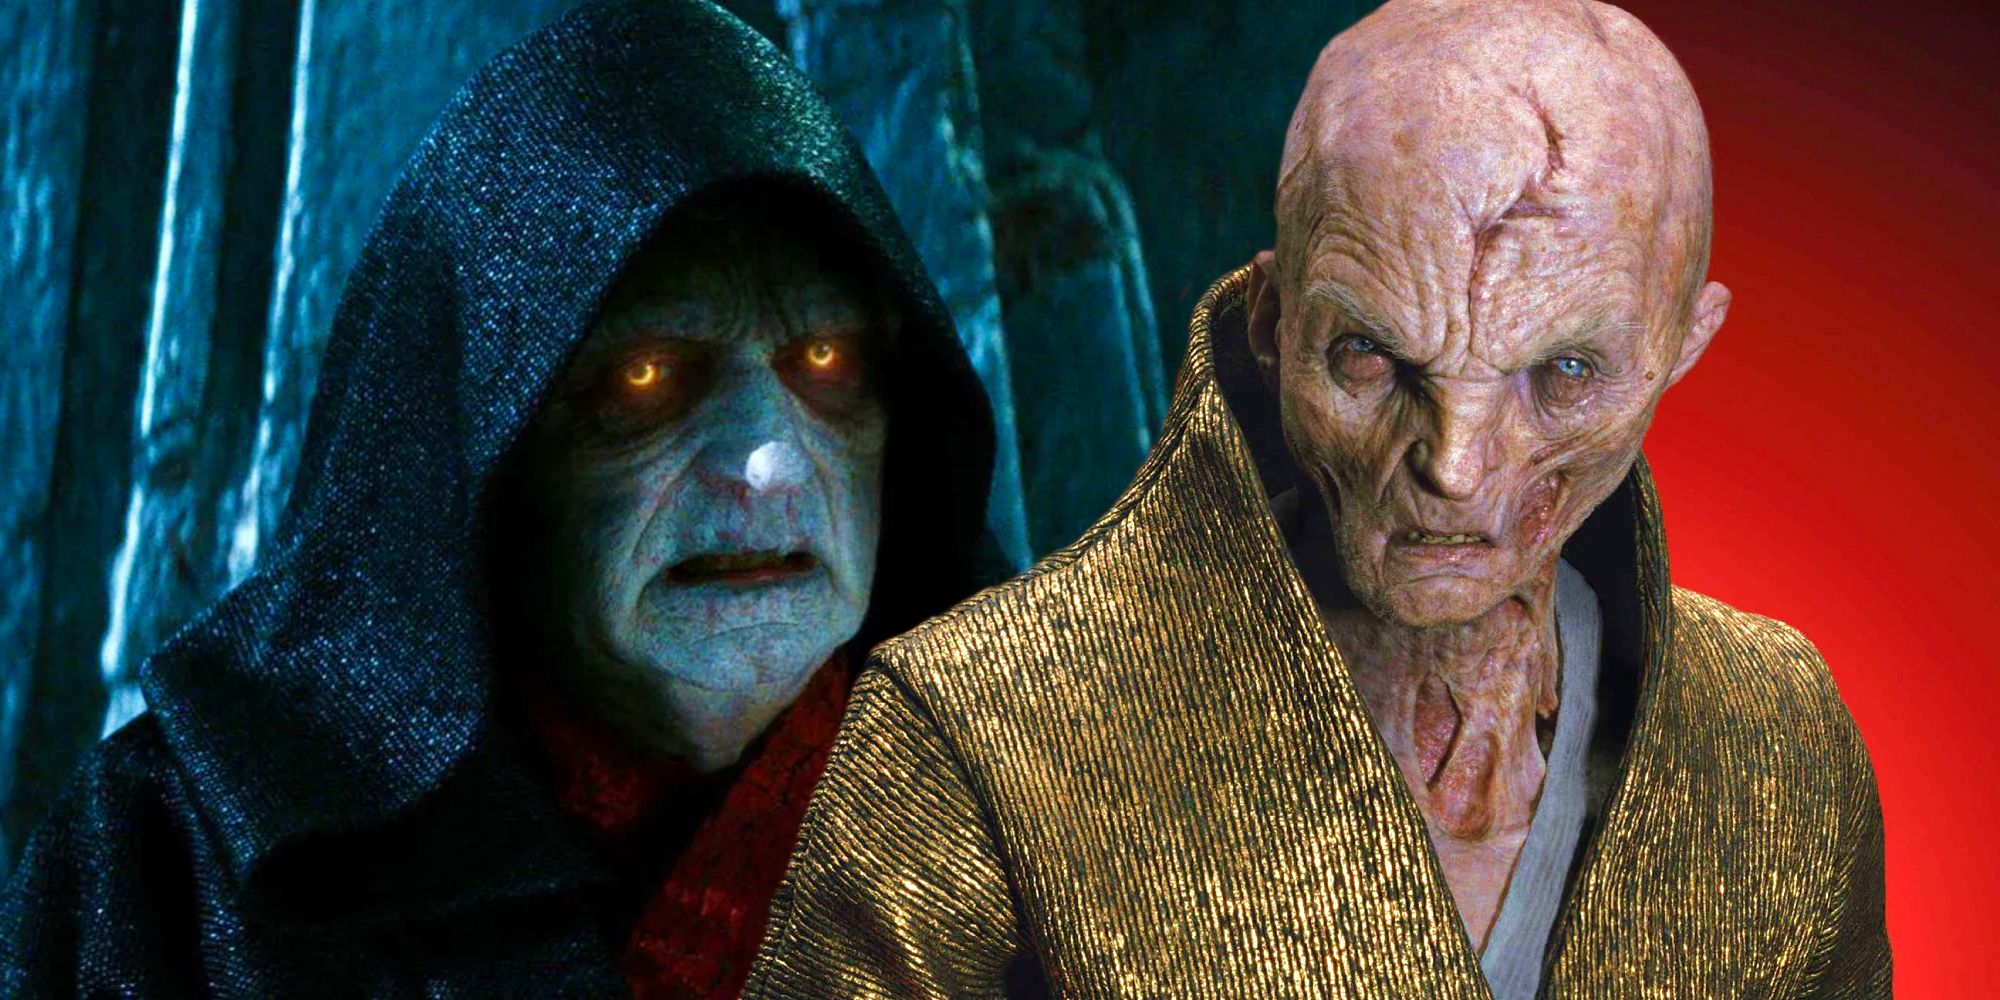 Palpatine's clone from Star Wars: The Rise of Skywalker and Snoke from Star Wars: The Last Jedi